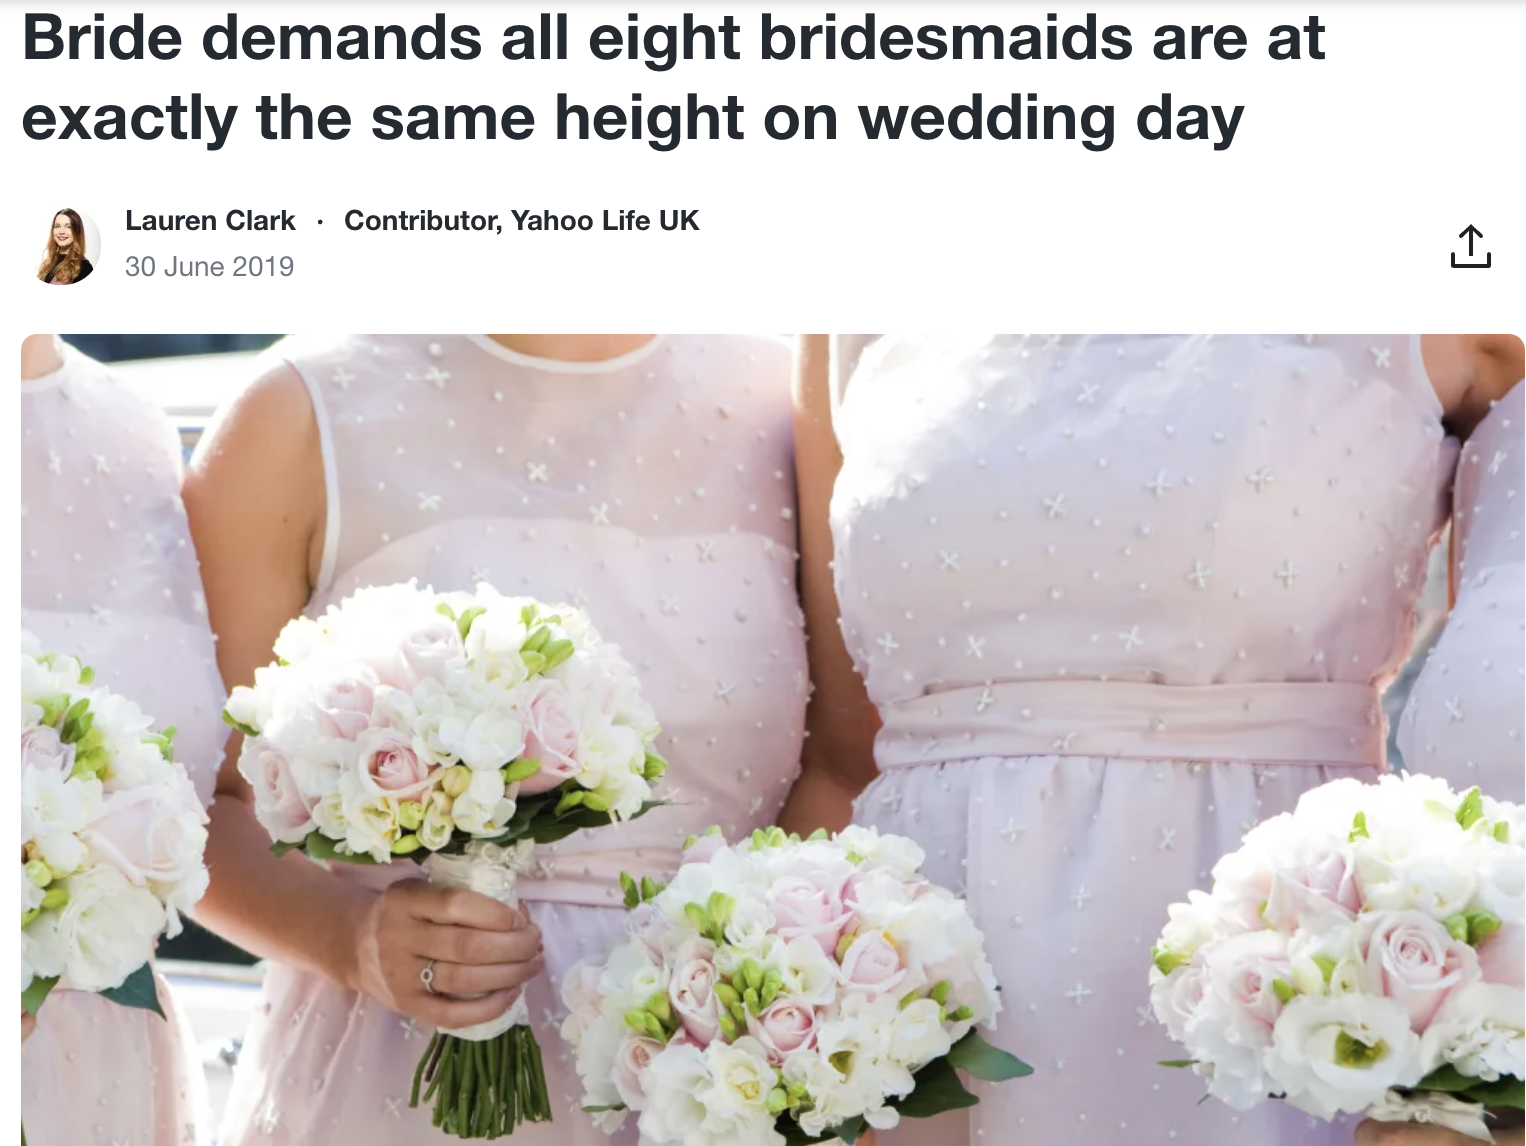 Bridesmaid dress - Bride demands all eight bridesmaids are at exactly the same height on wedding day Lauren Clark Contributor, Yahoo Life Uk